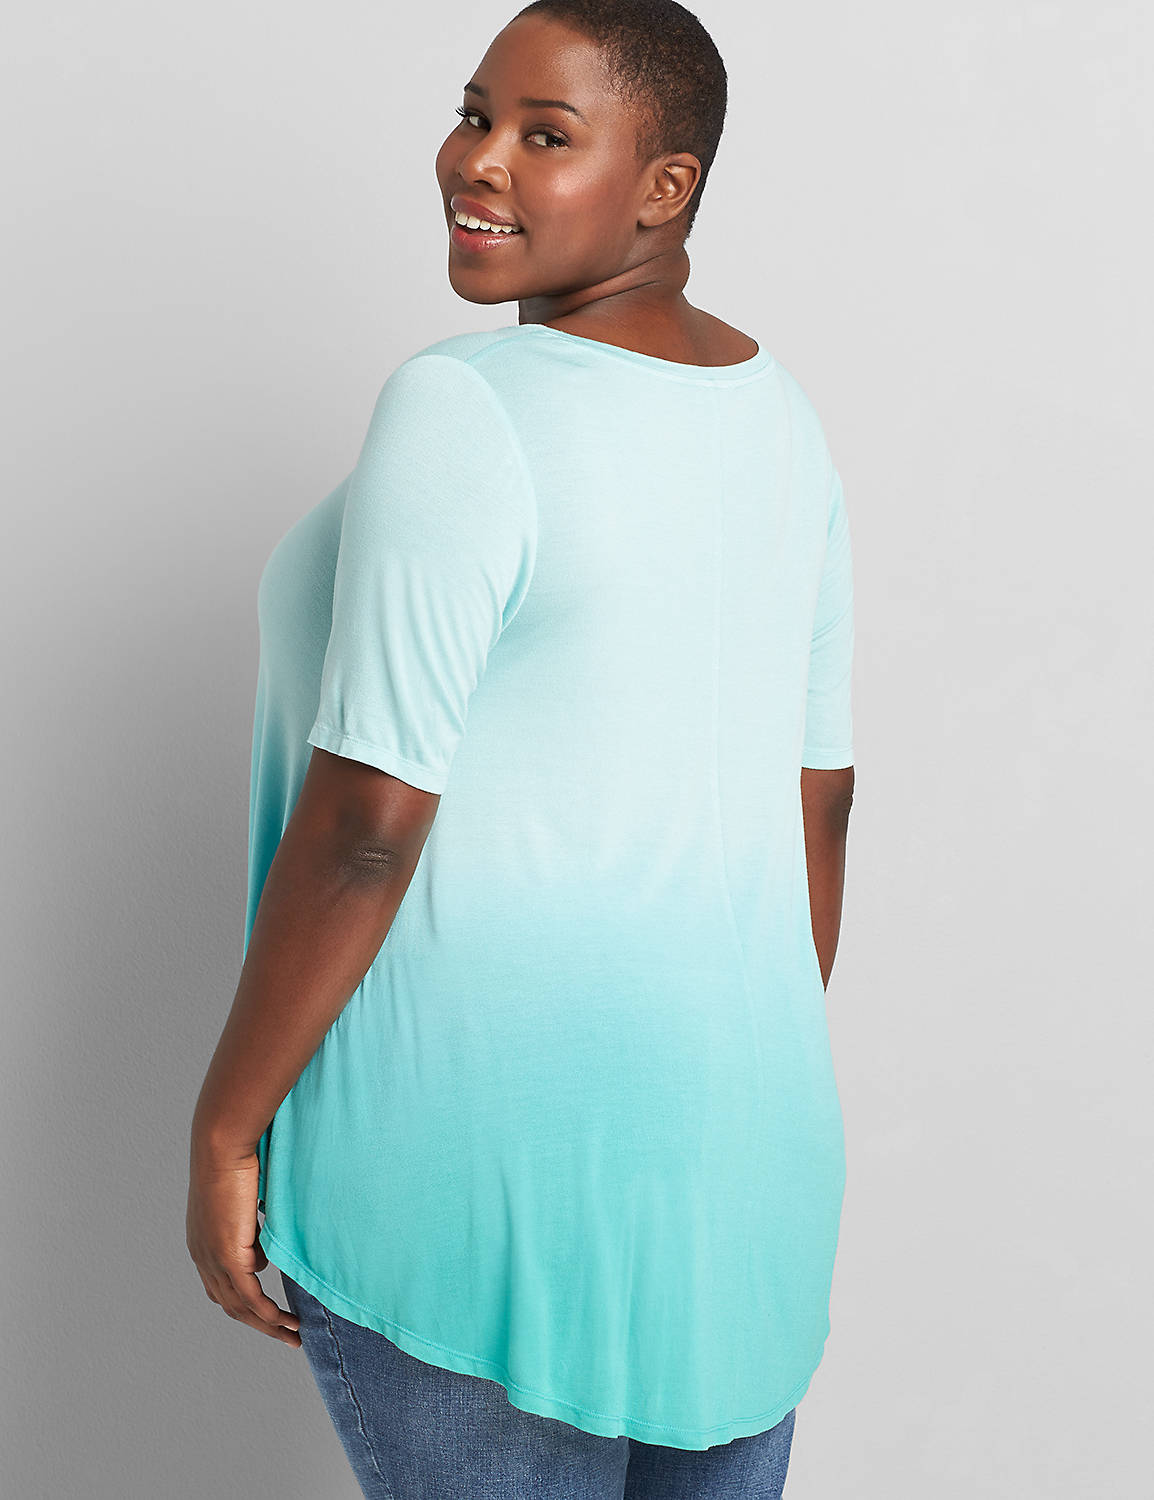 Perfect Sleeve Vneck Drapey Tunic 1118711:Teal Zeal CSI 0601628:14/16 Product Image 2